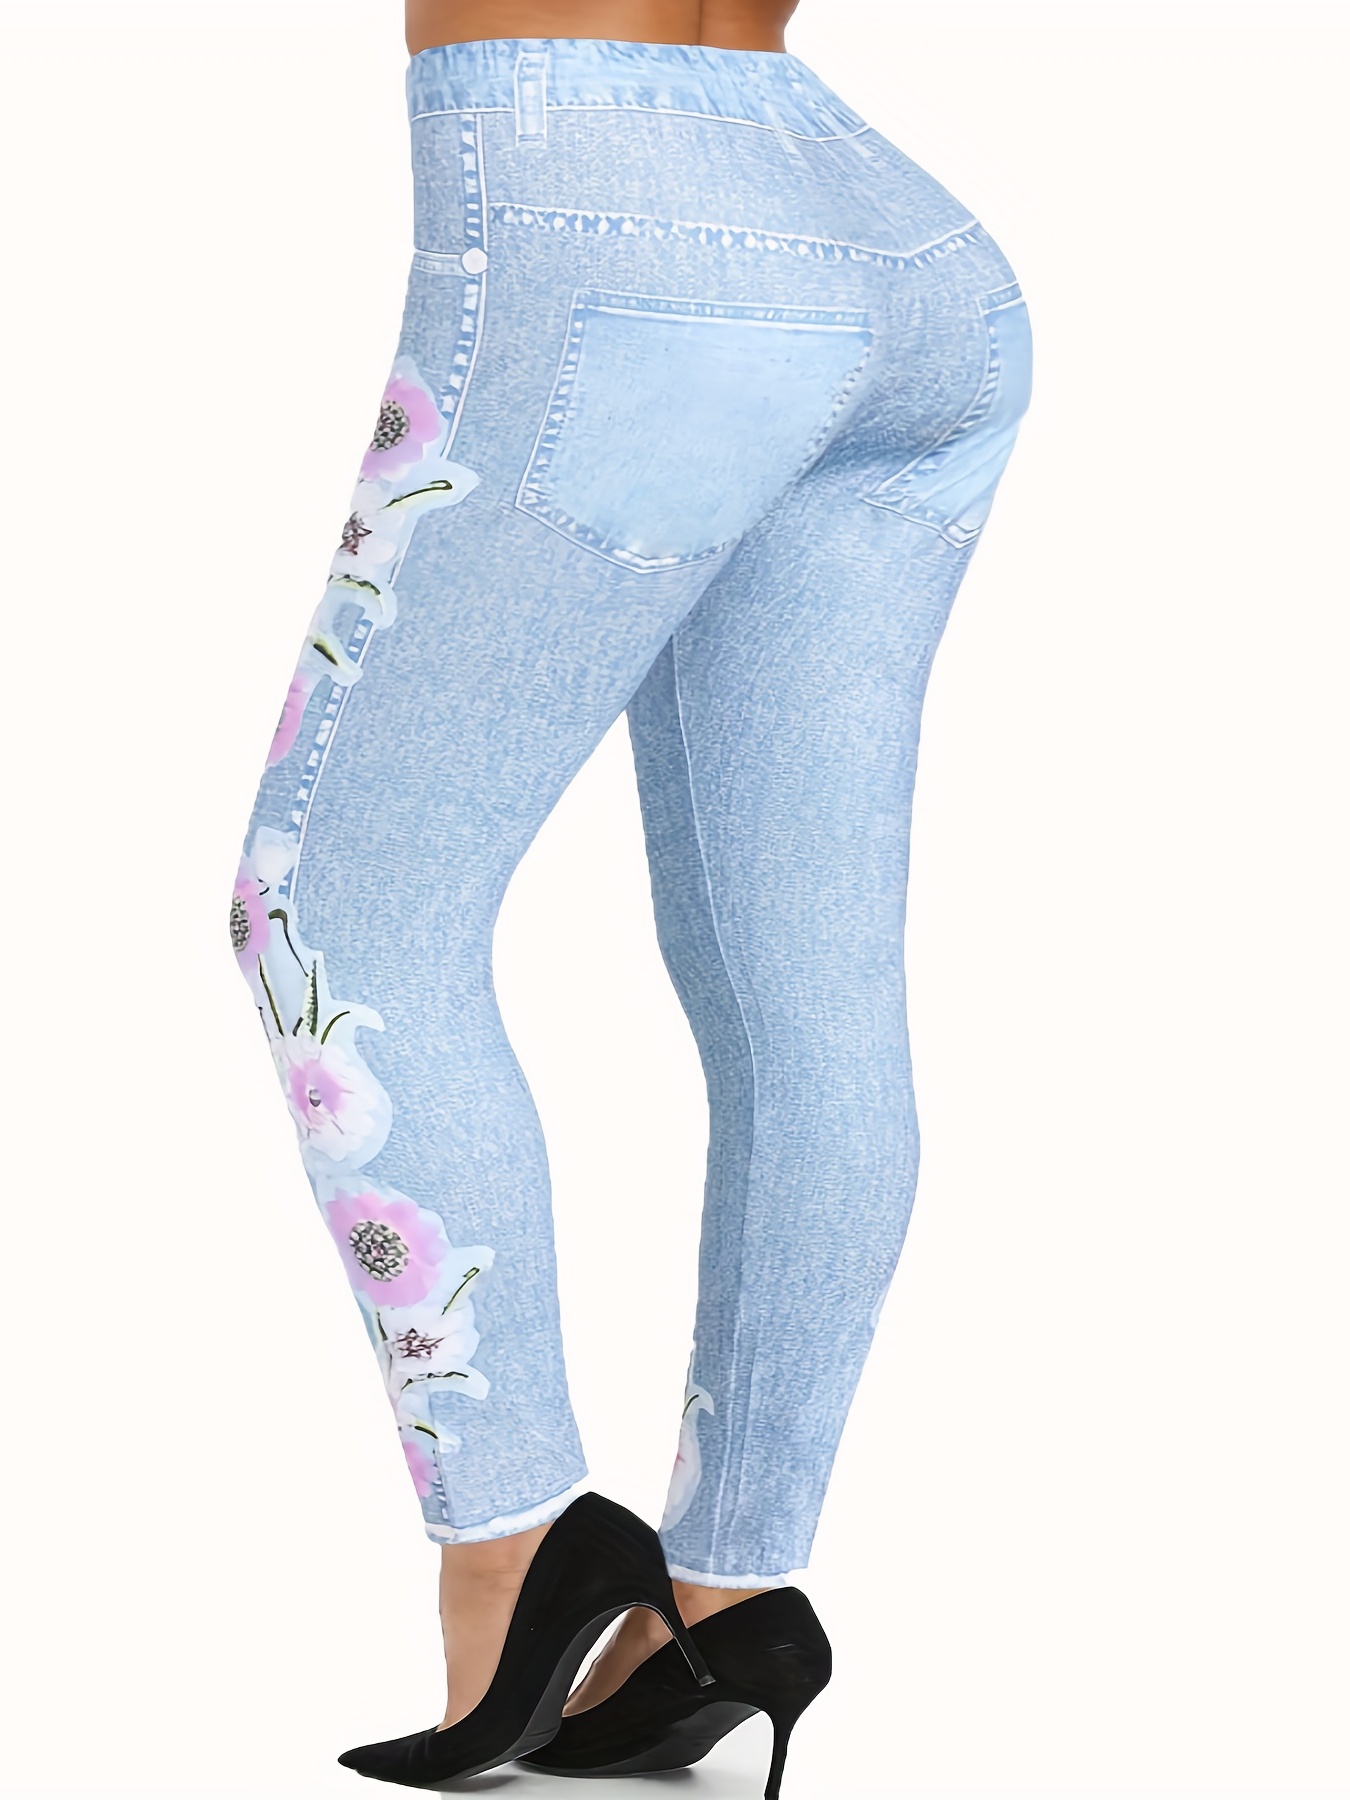  Ladies Casual Comfort Printed Stretch High Waist